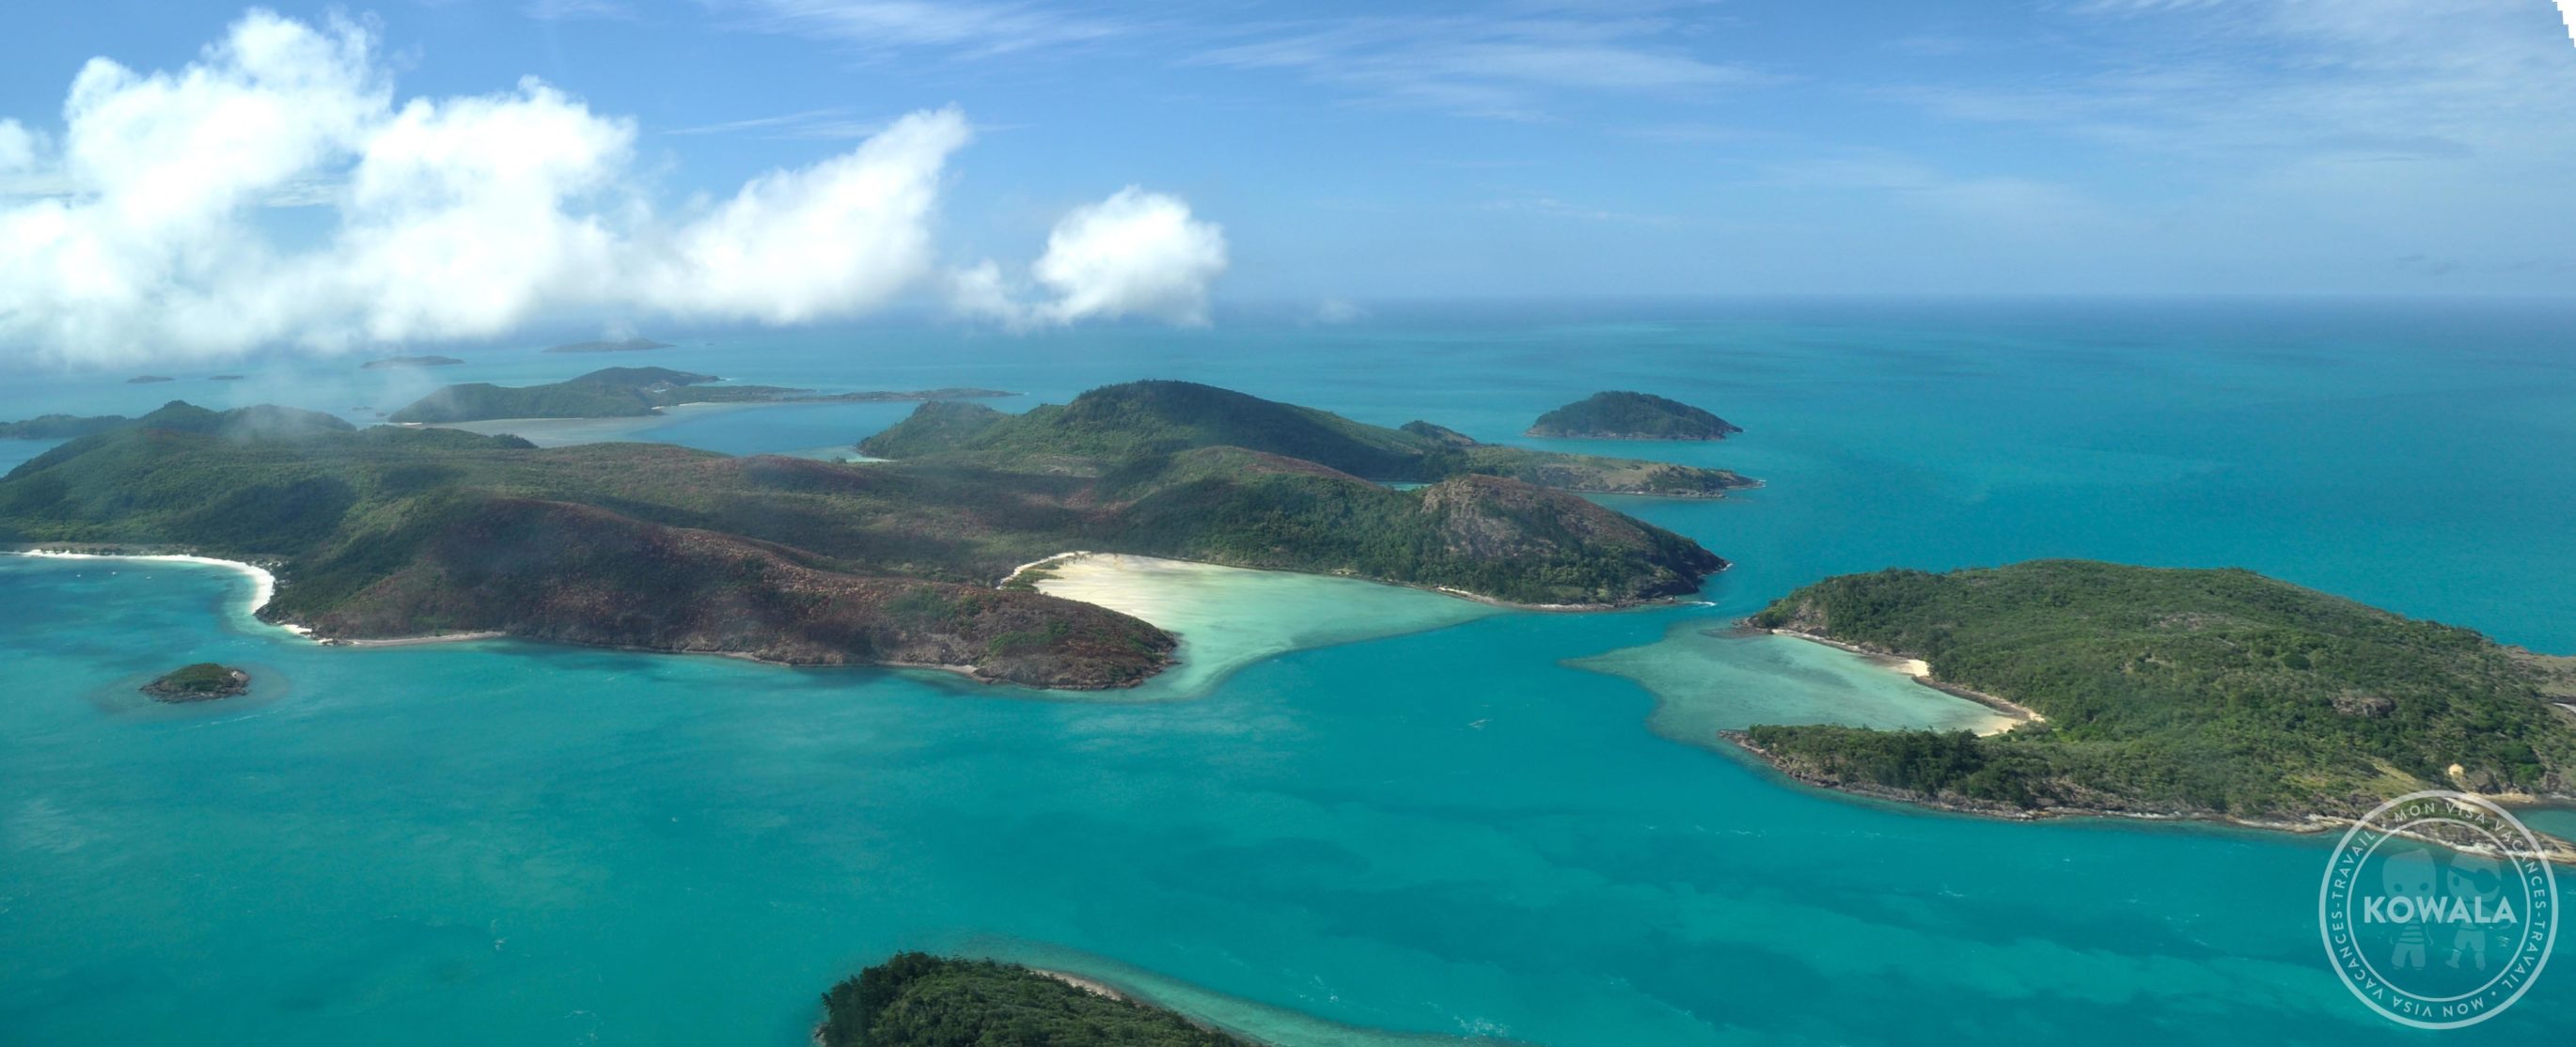 Whitsunday Islands Panoramique - incontournables whv australie